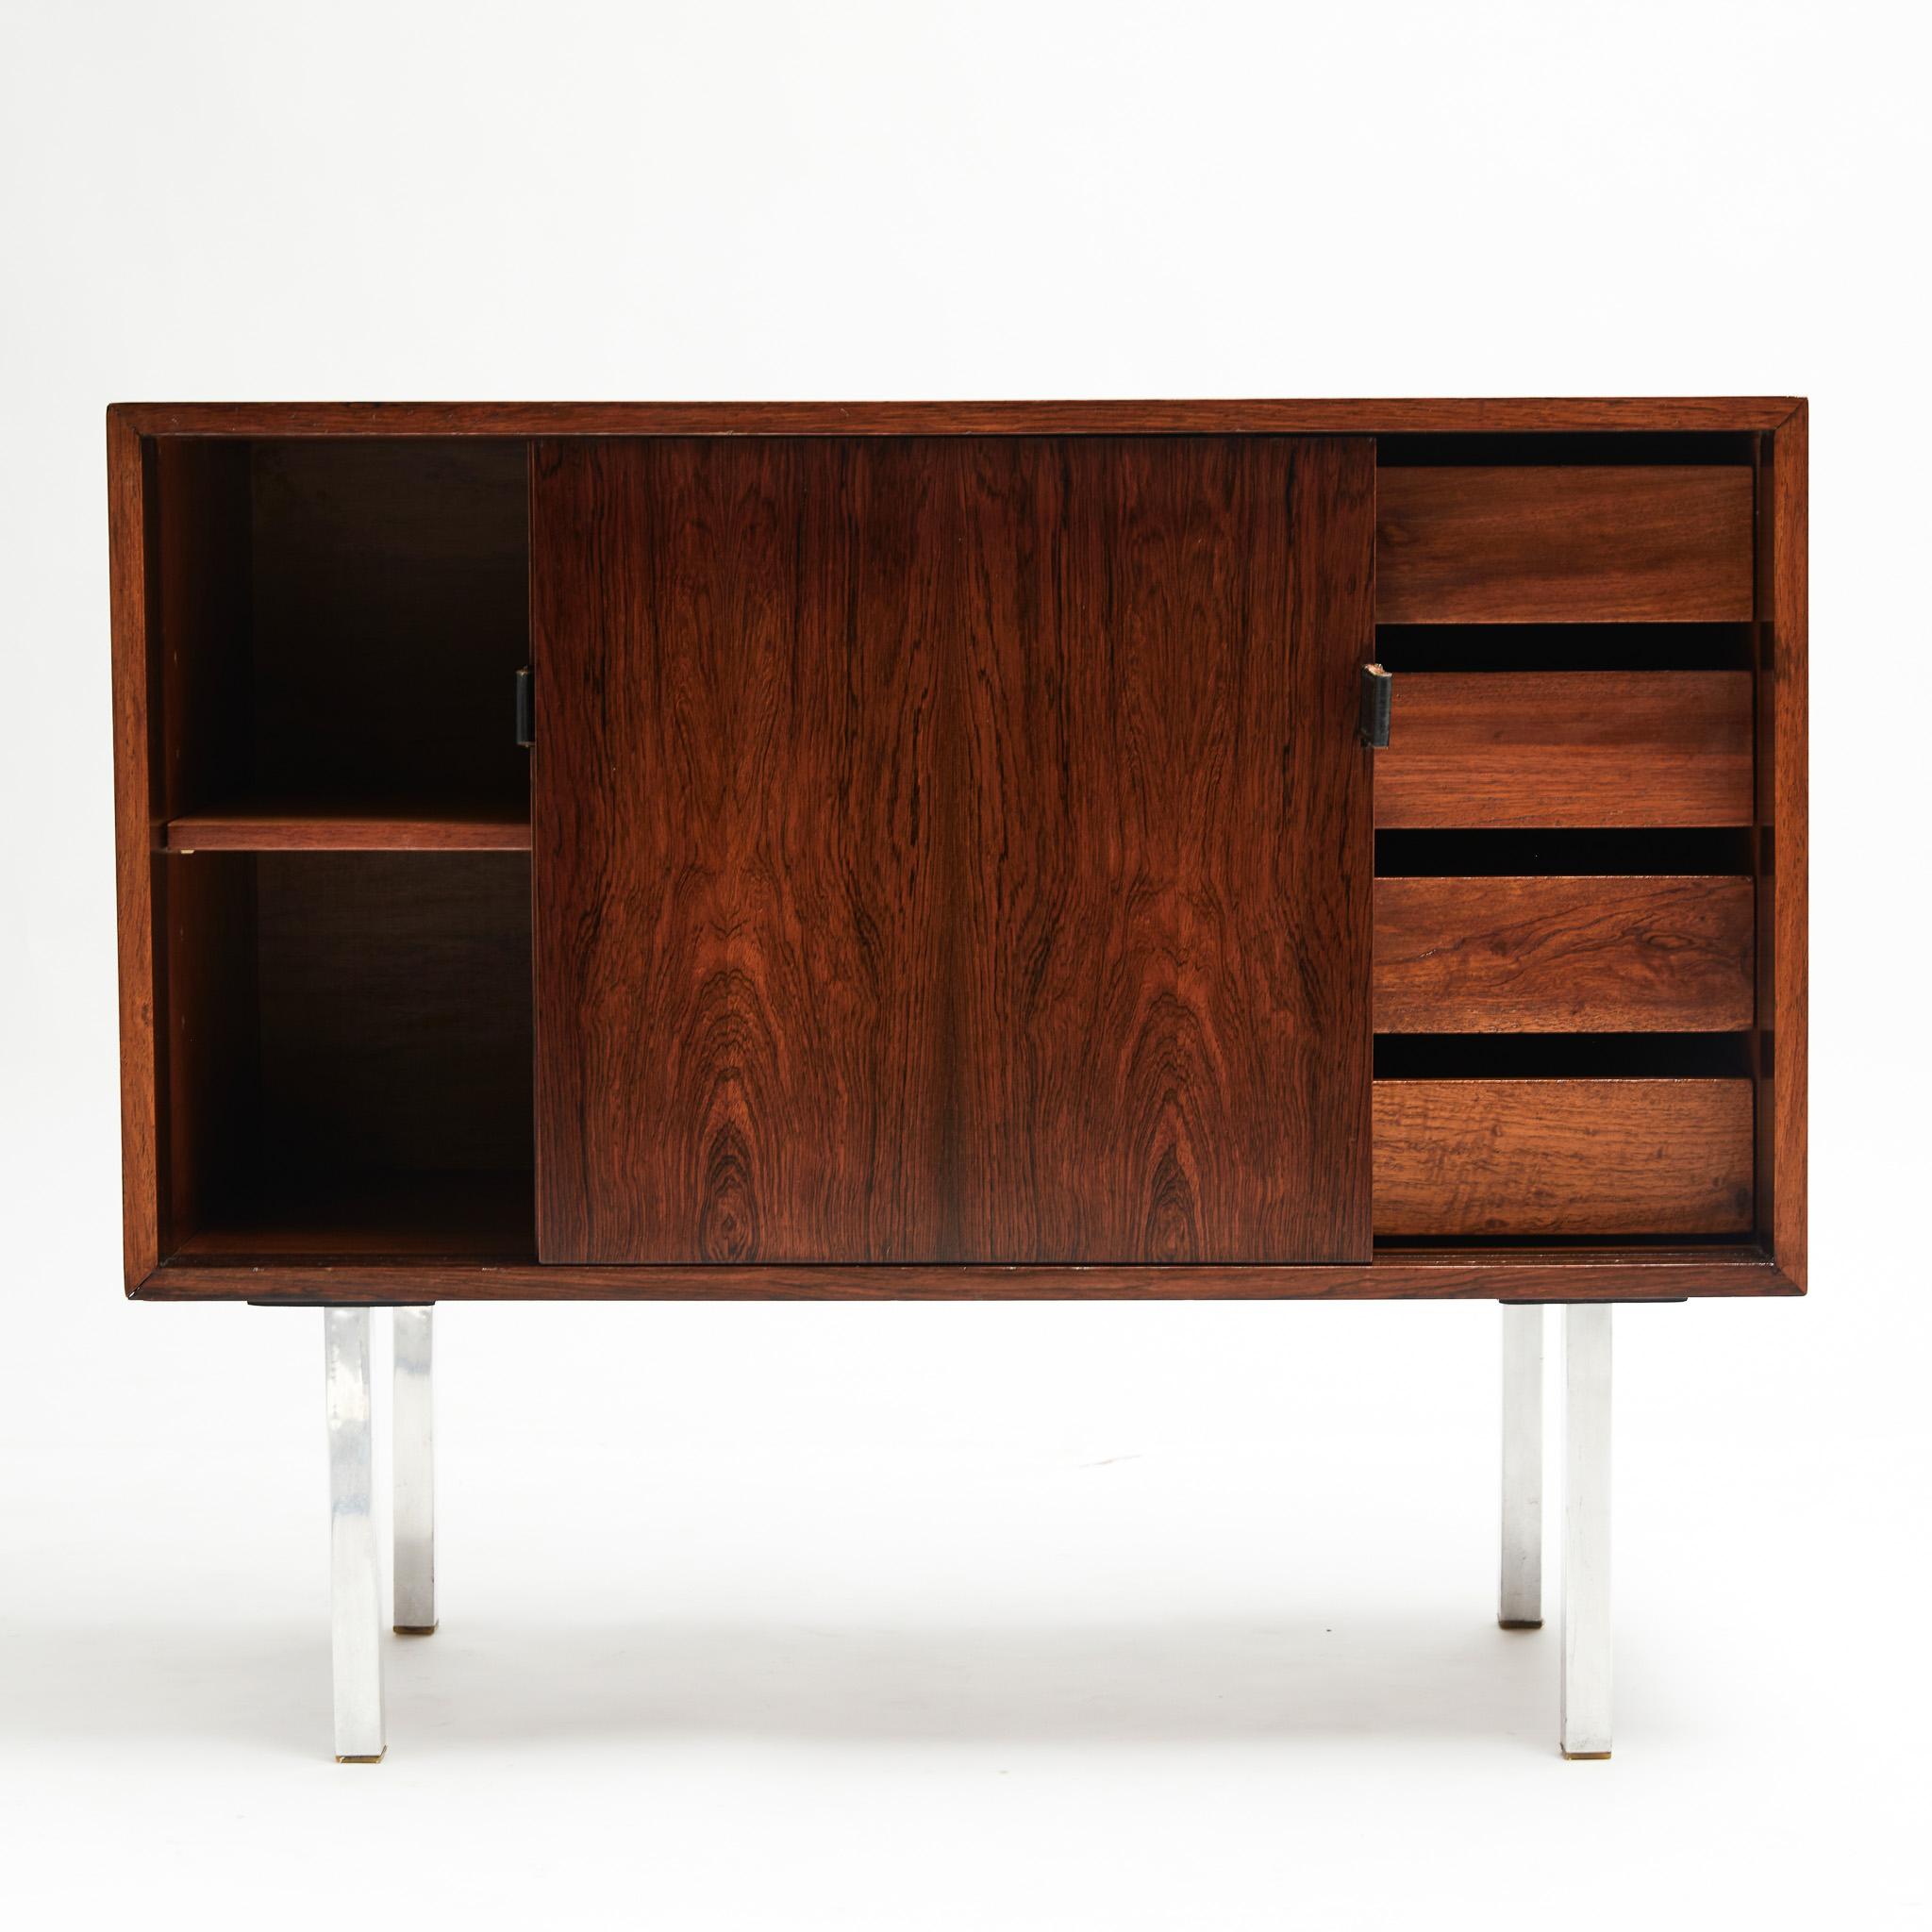 Brazilian Midcentury Chest in Hardwood & Chrome by Forma Moveis, 1965 Brazil, Sealed For Sale